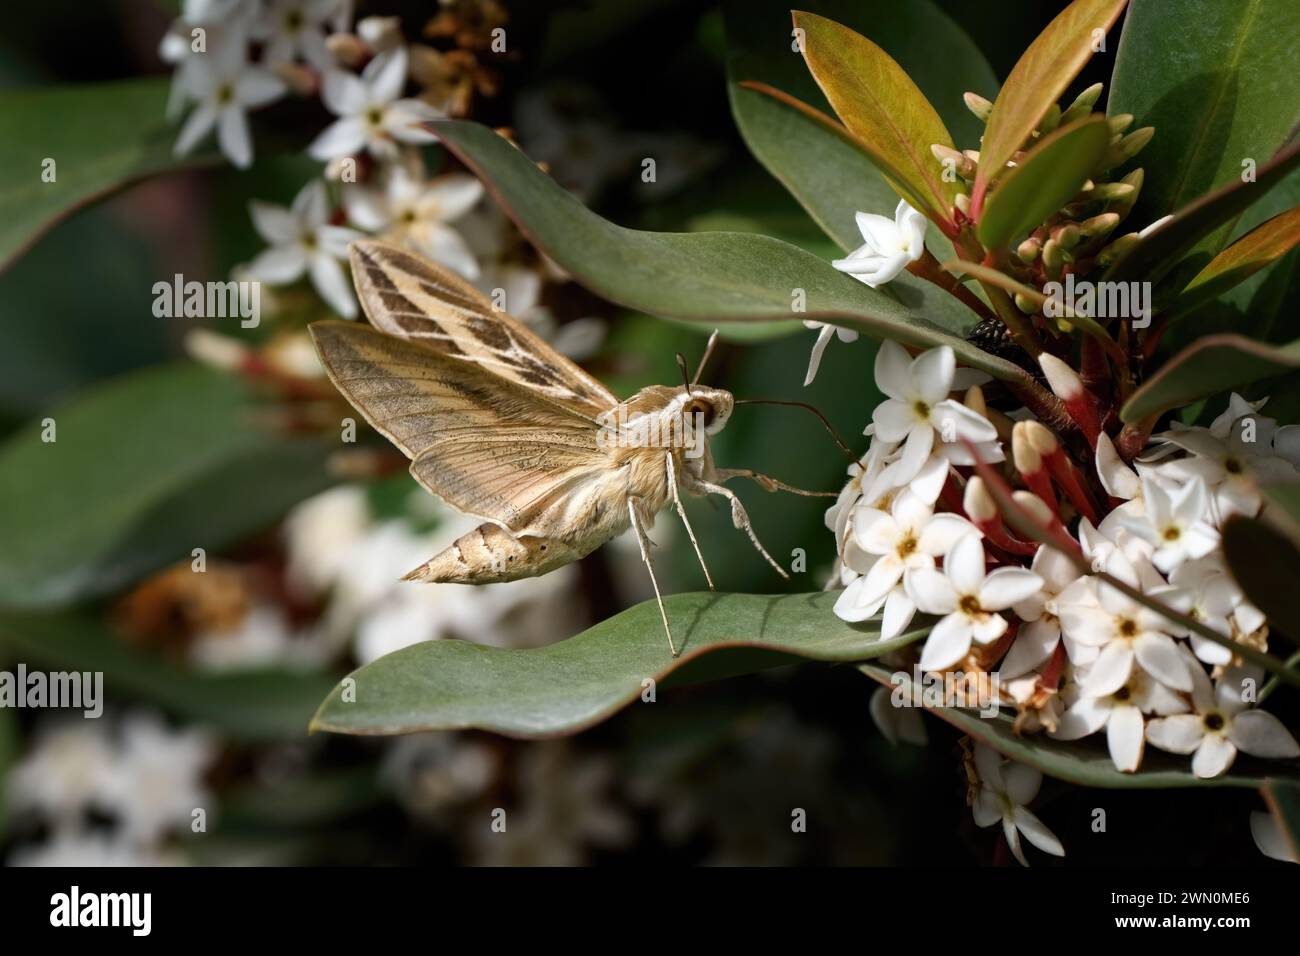 Striped Hawk-Moth (Hyles livornica) at the flowers of Dune Poison Bush Stock Photo